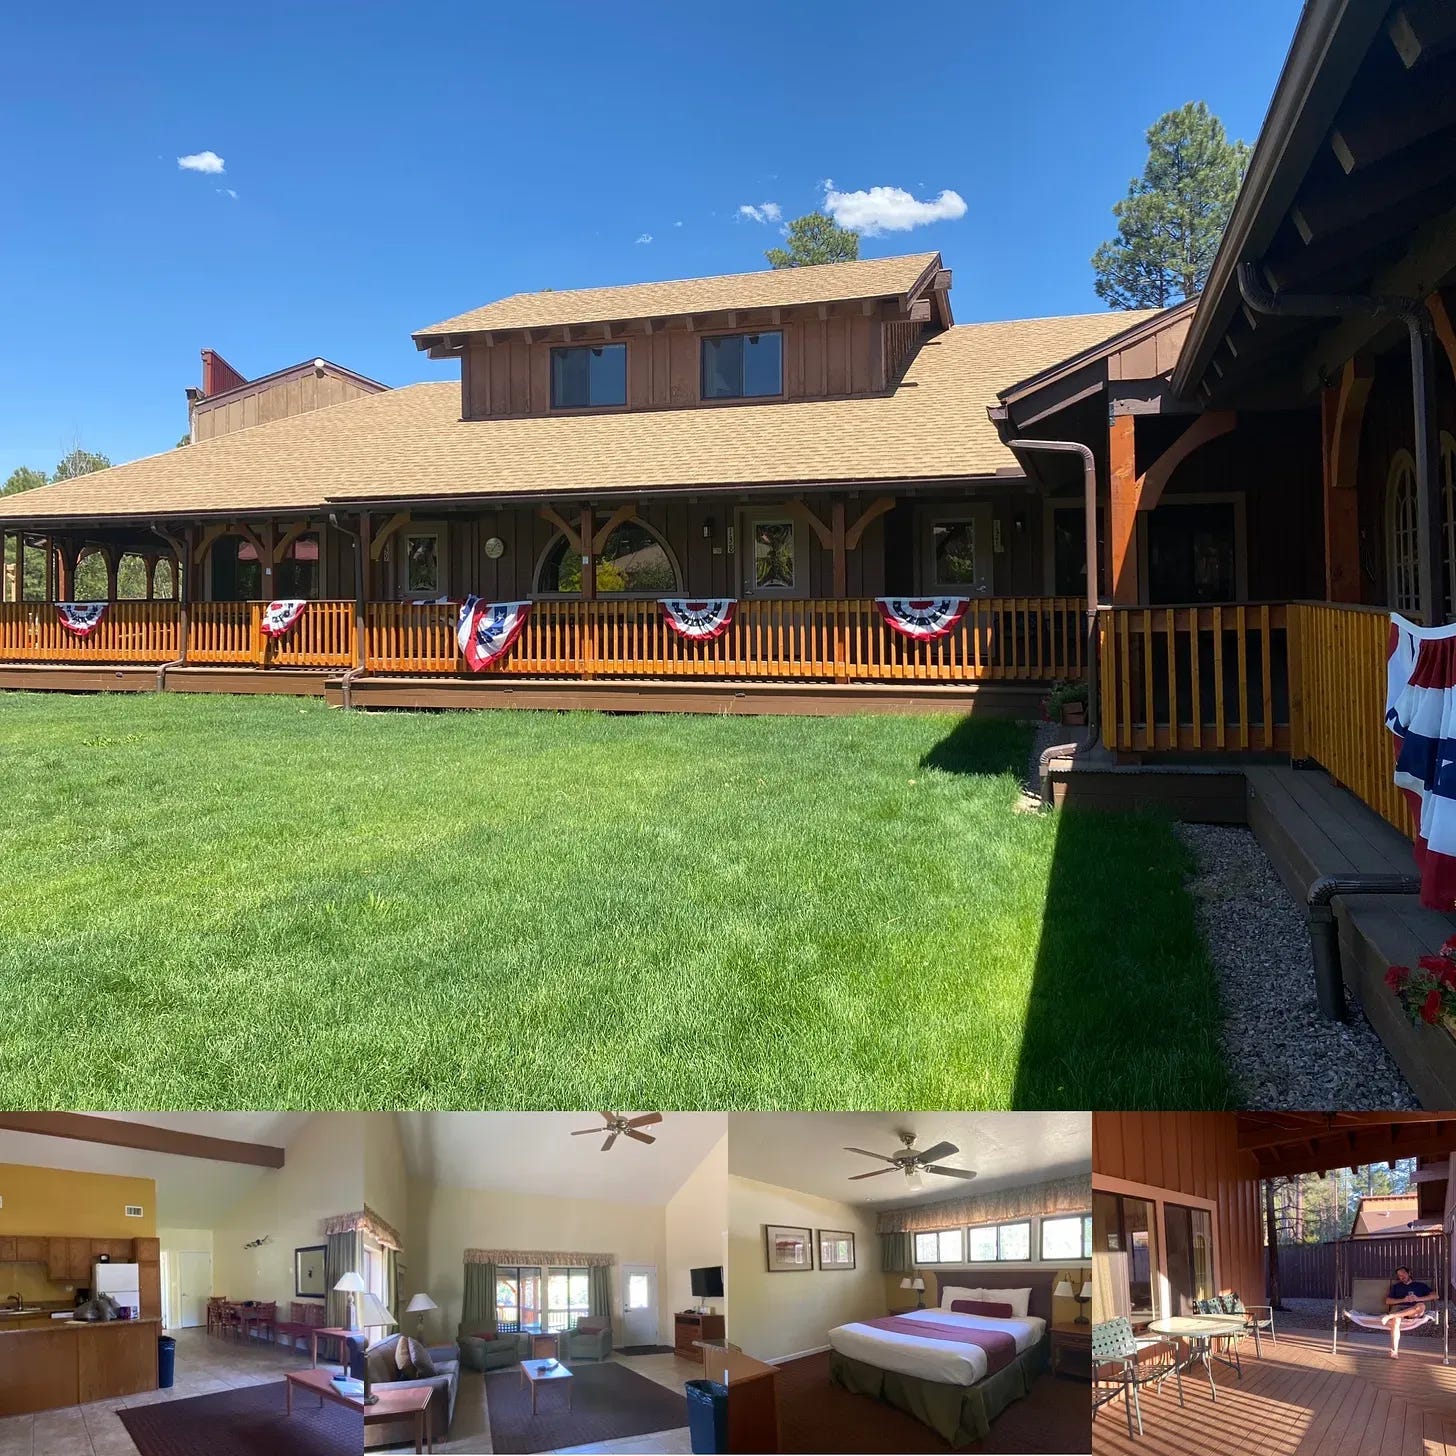 Photos of the resort we stayed in at Pinetop, AZ.